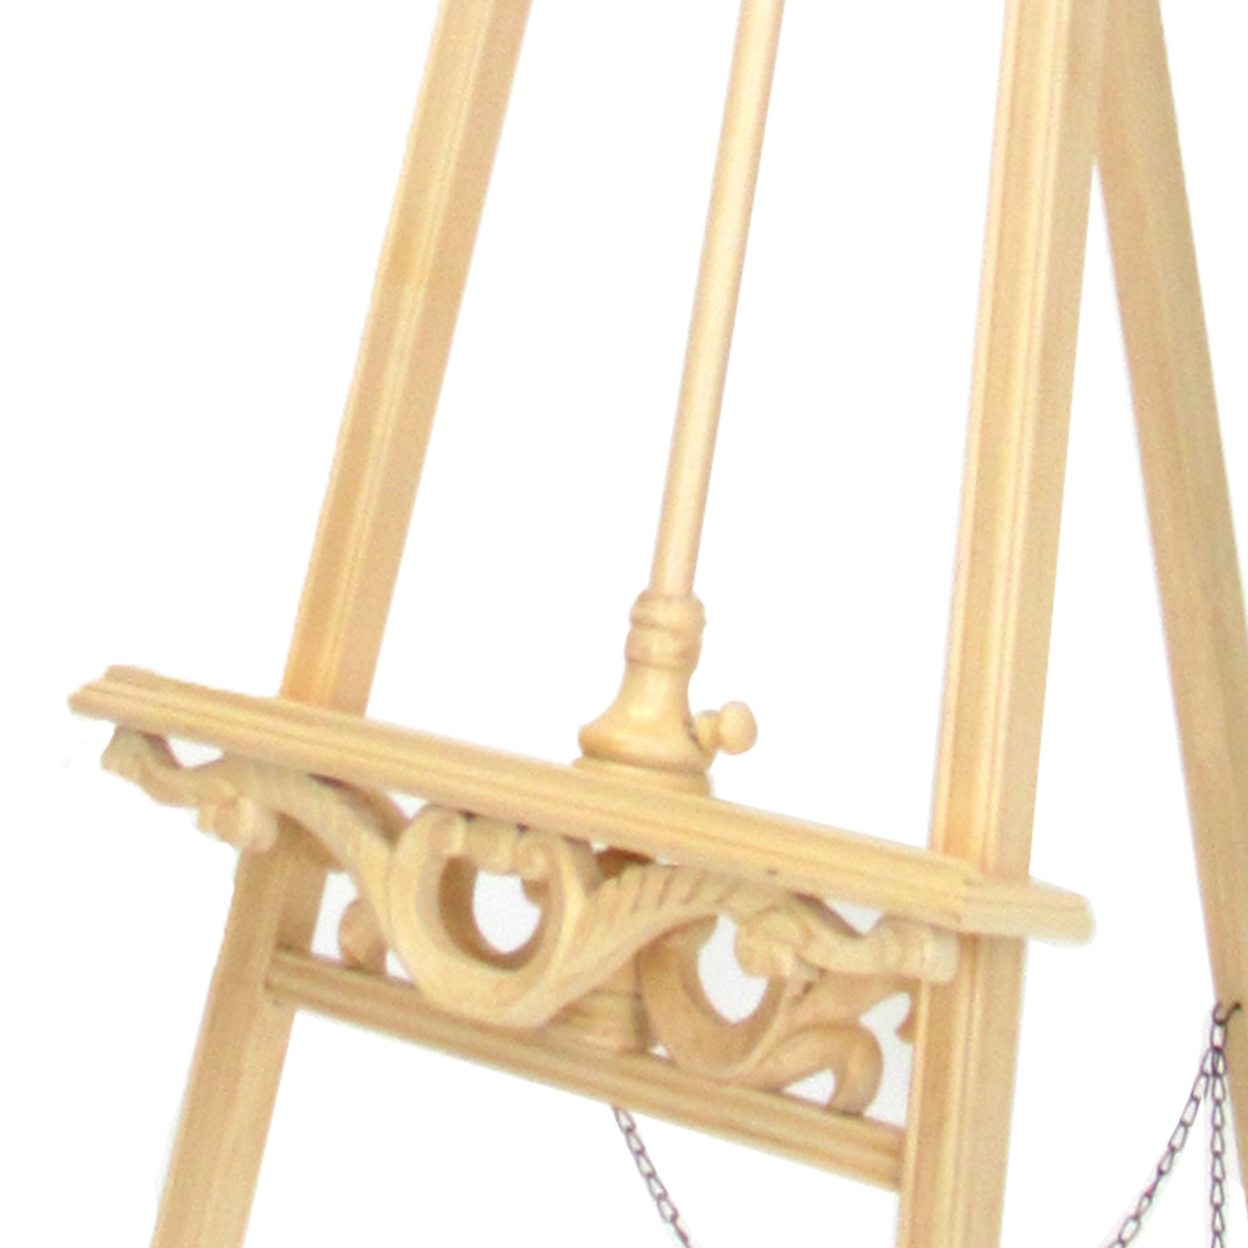 Traditional Style Wooden Easel With Scrollwork Details, Antique White- Saltoro Sherpi